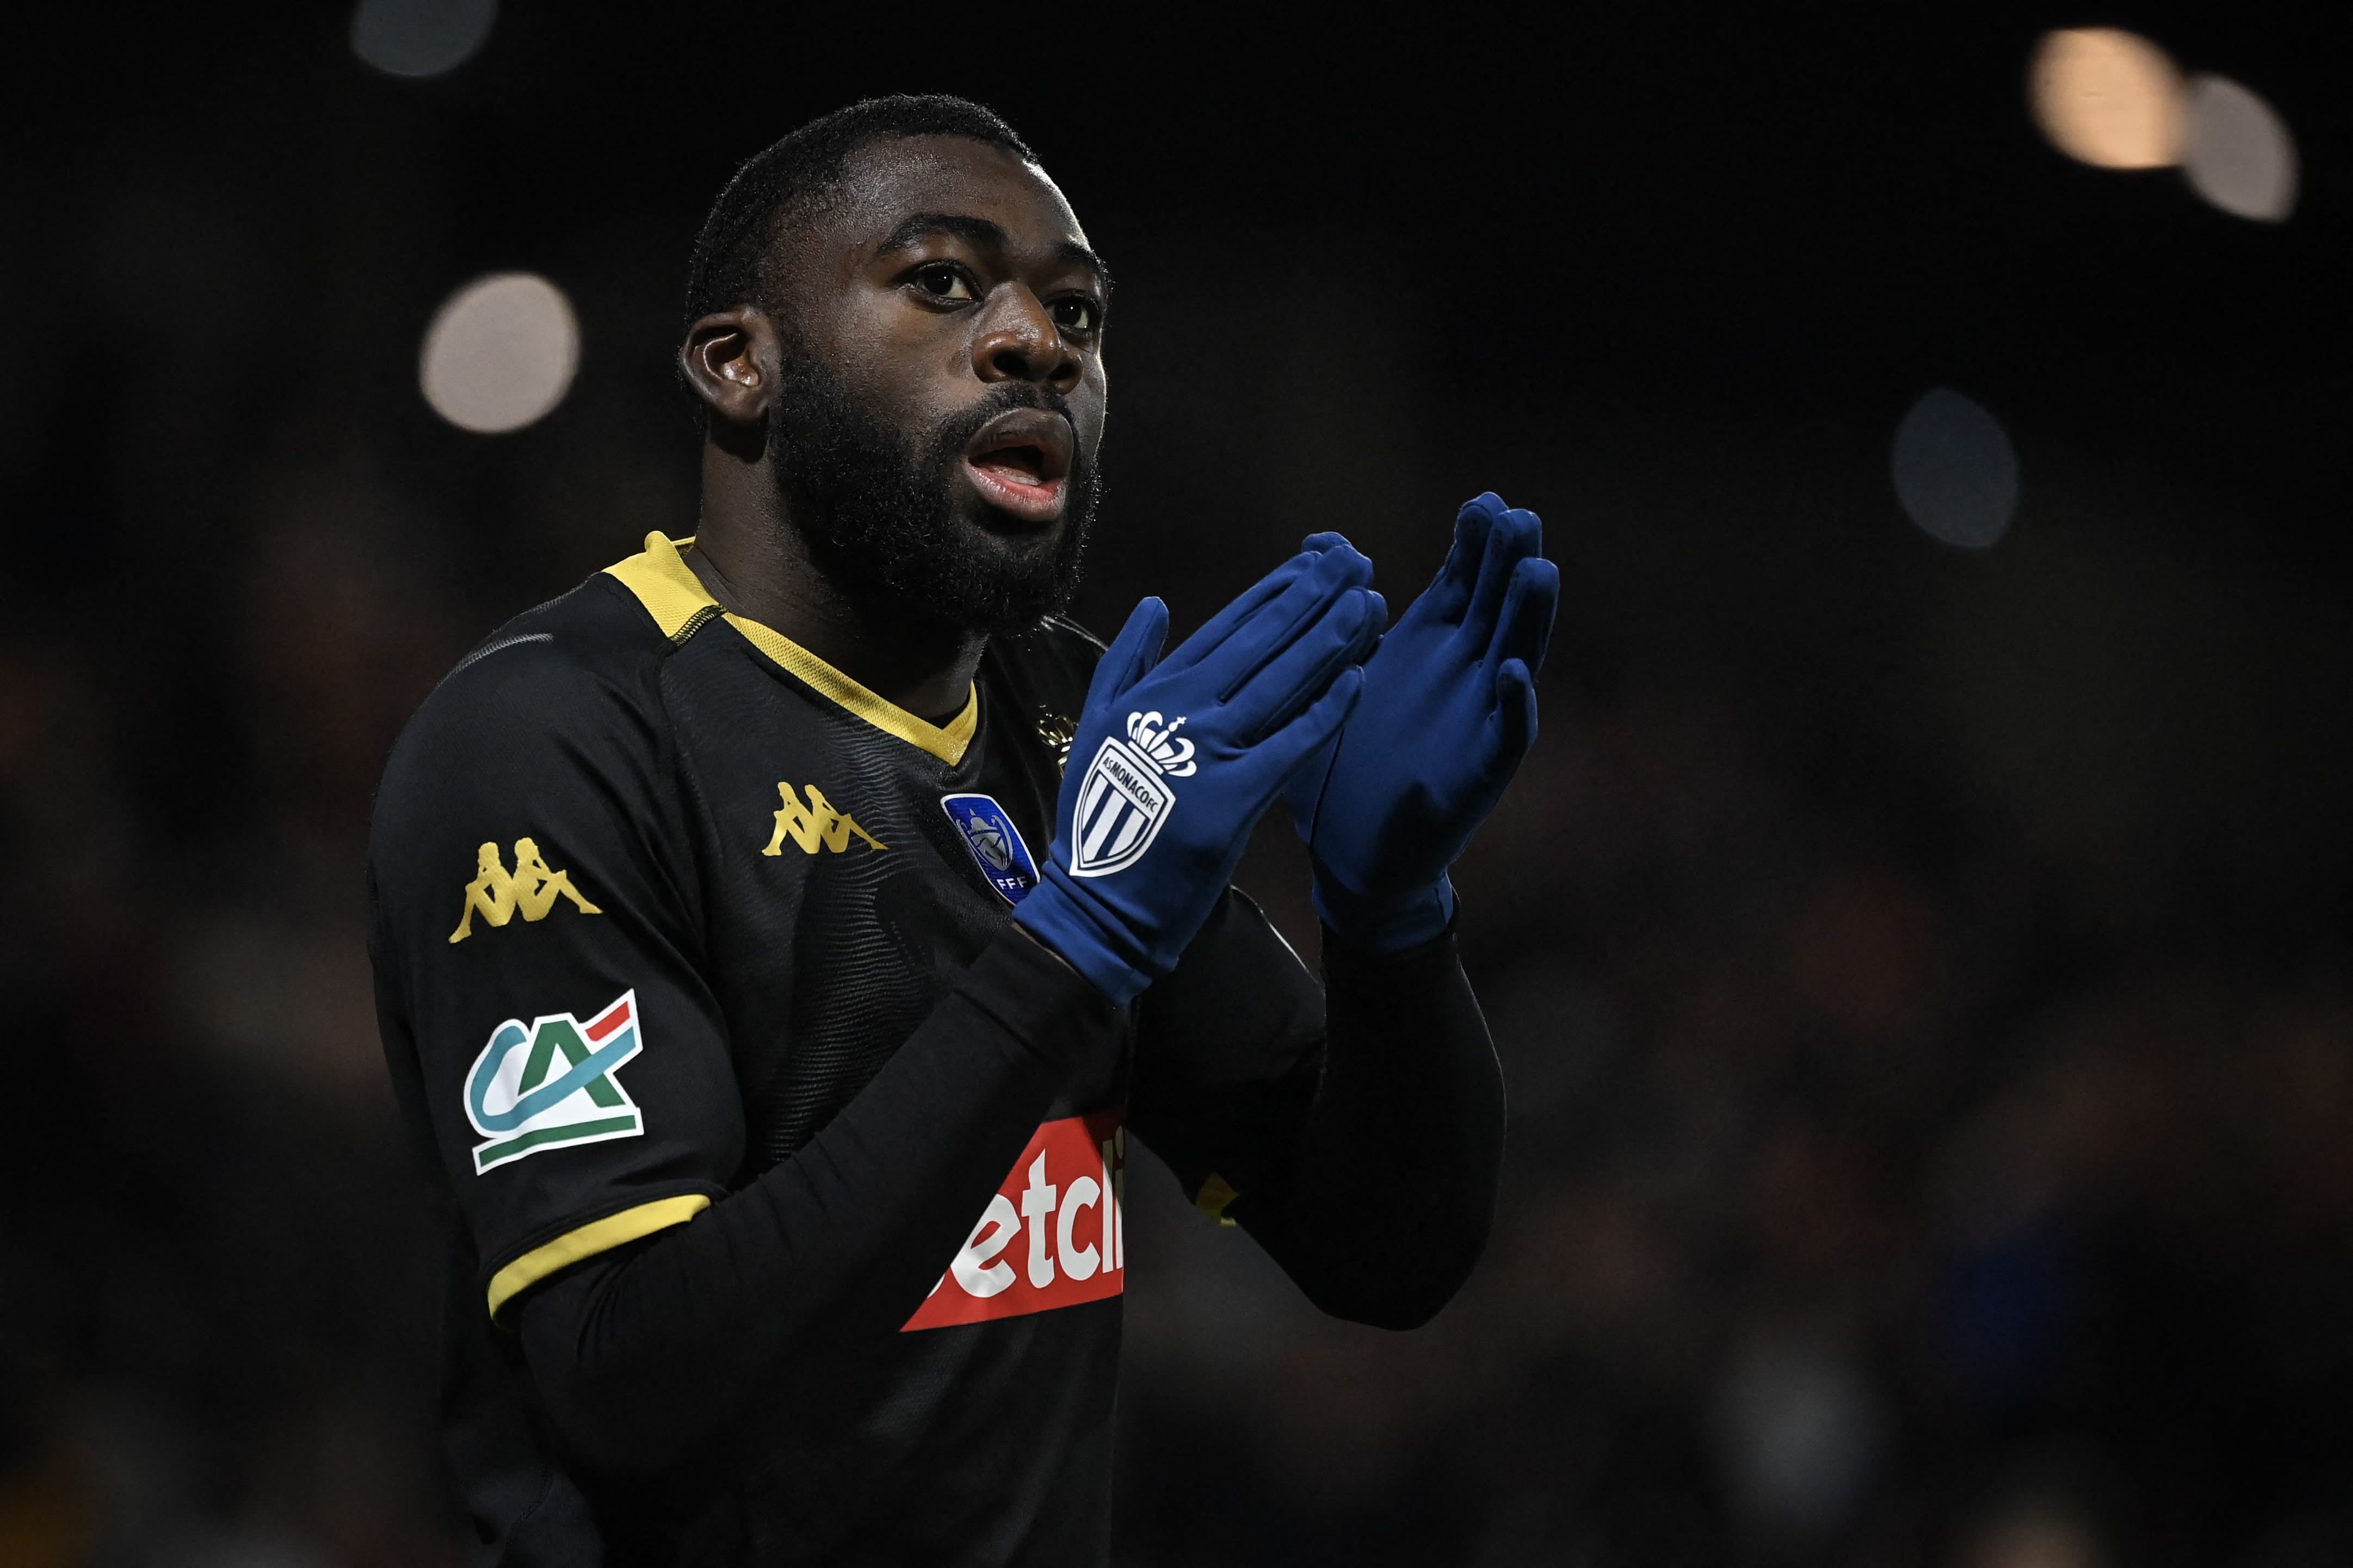 Monaco revise asking price for Youssouf Fofana amidst Milan and Manchester United interest